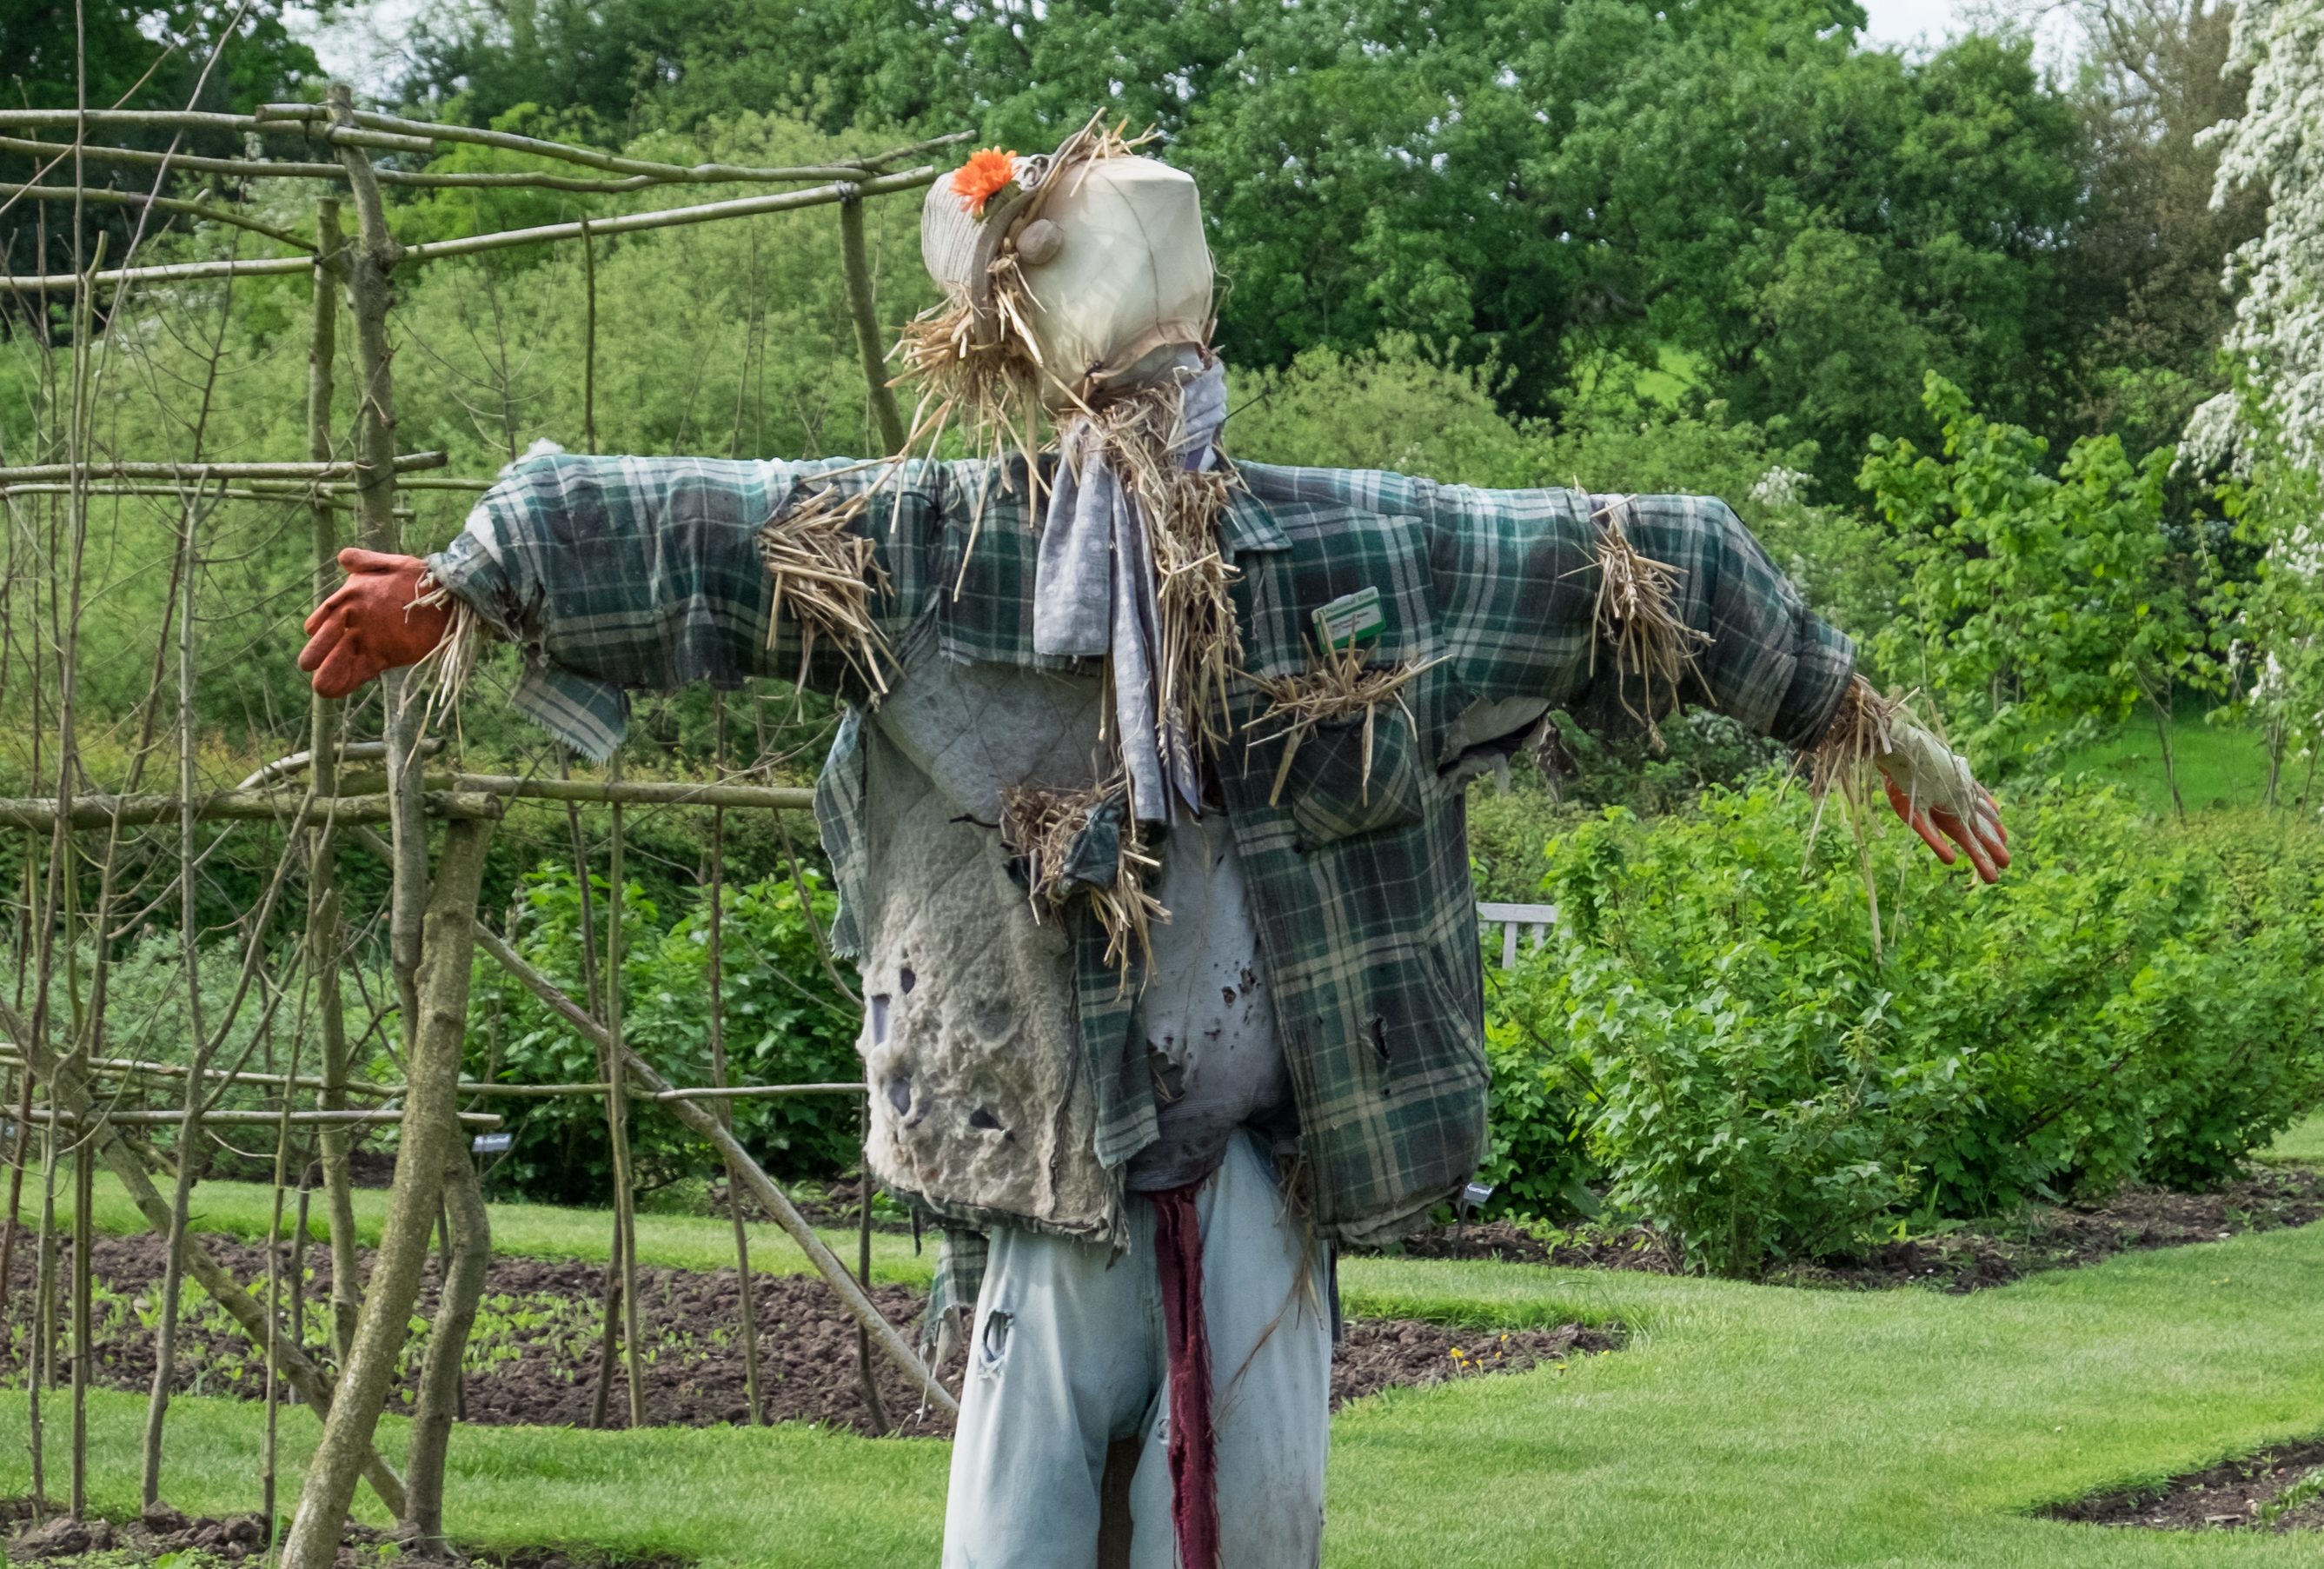 Build Your Own Scarecrow Event In Wicker Park Offers Socially Distant Way  To Raise Cash For Local Groups